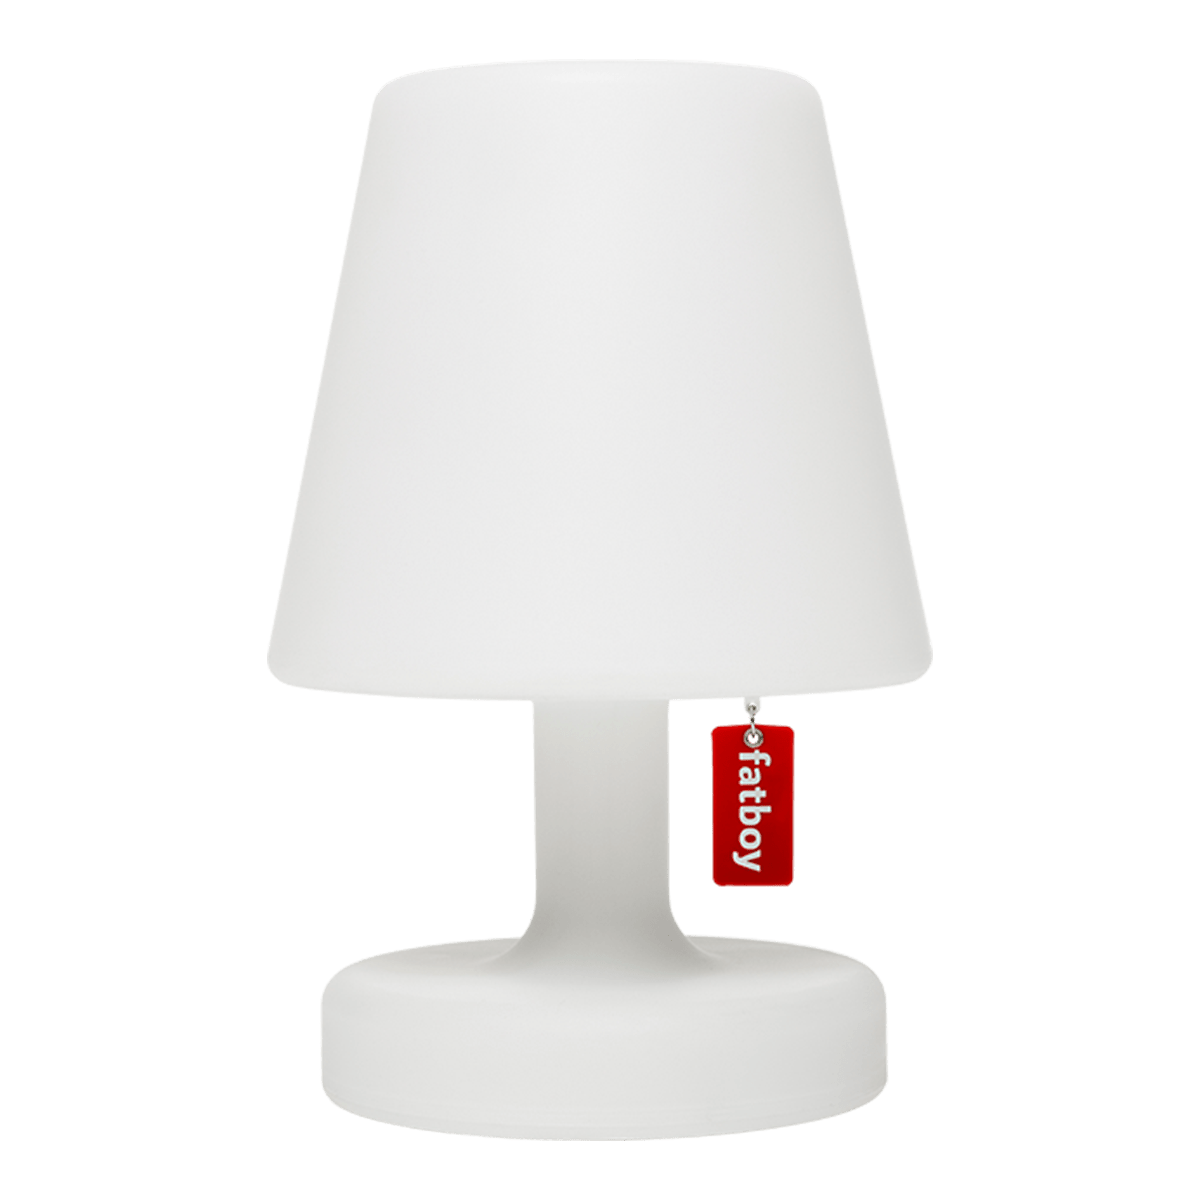 Edison the Petit: white table lamp for indoor & outdoor use Fatboy